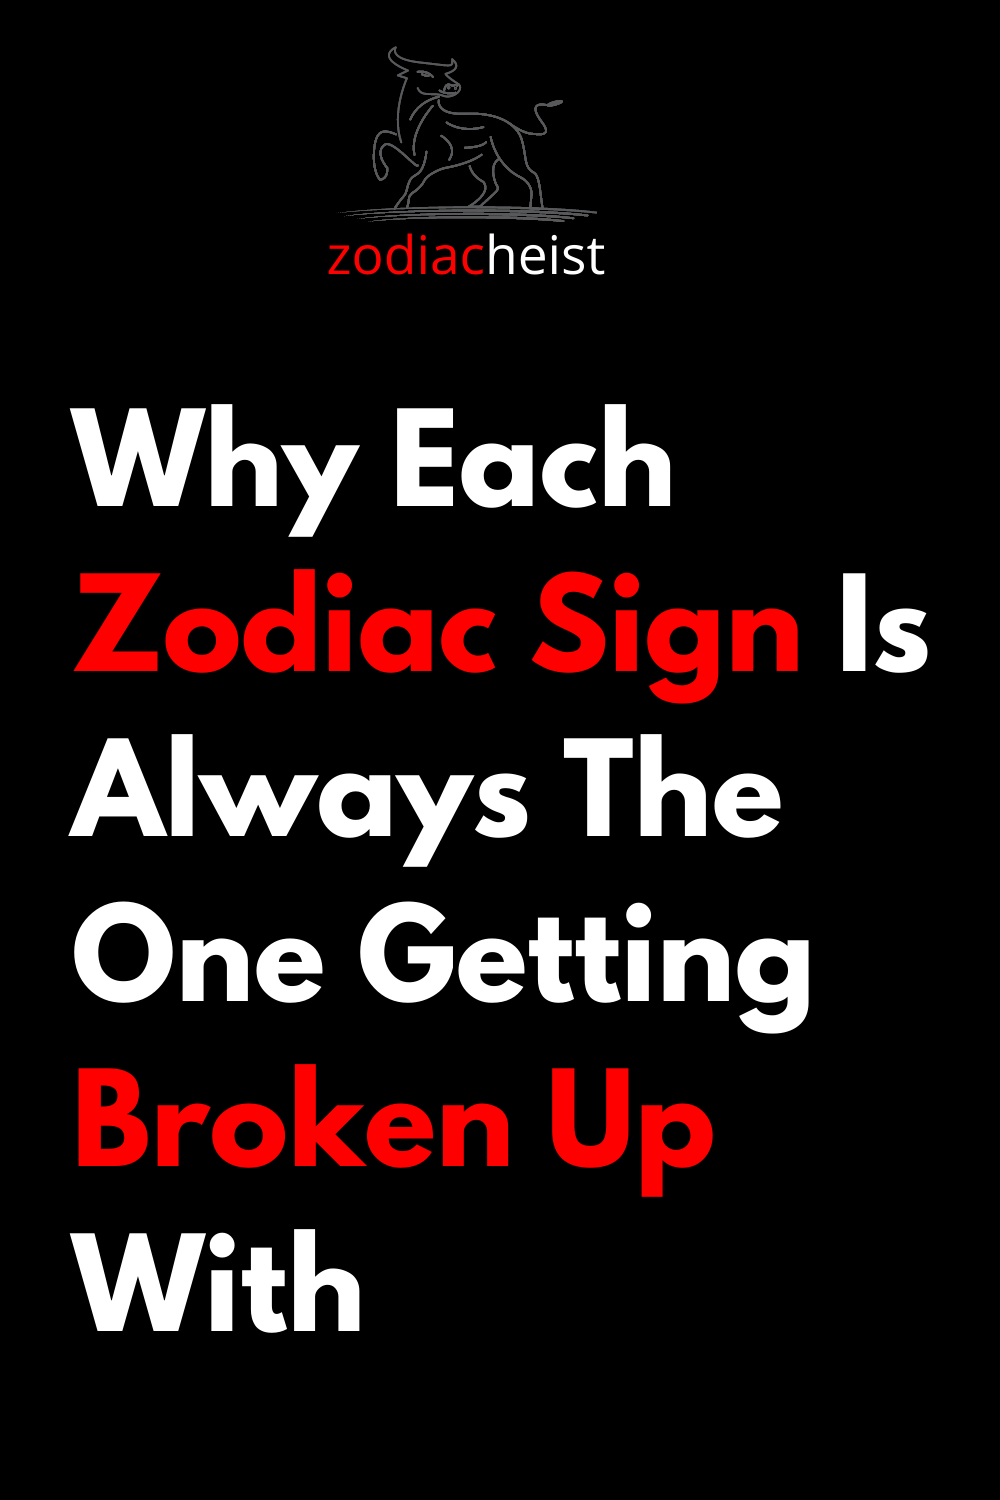 Why Each Zodiac Sign Is Always The One Getting Broken Up With